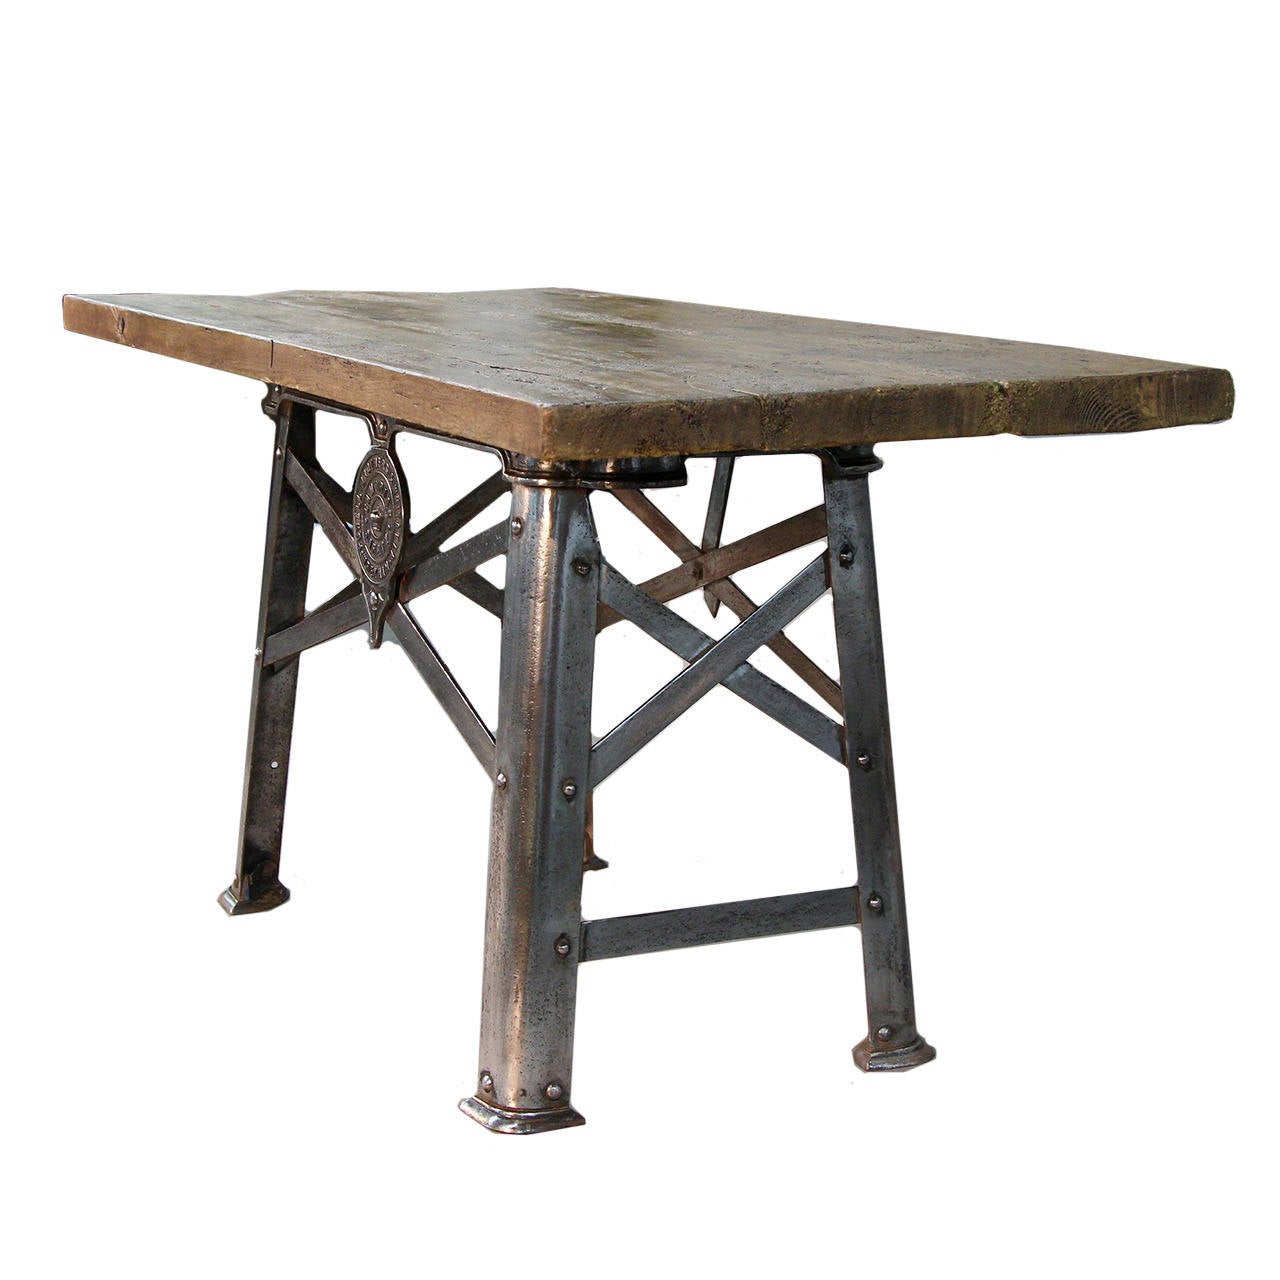 Polished English Industrial Engineer's Work Bench/Center Island